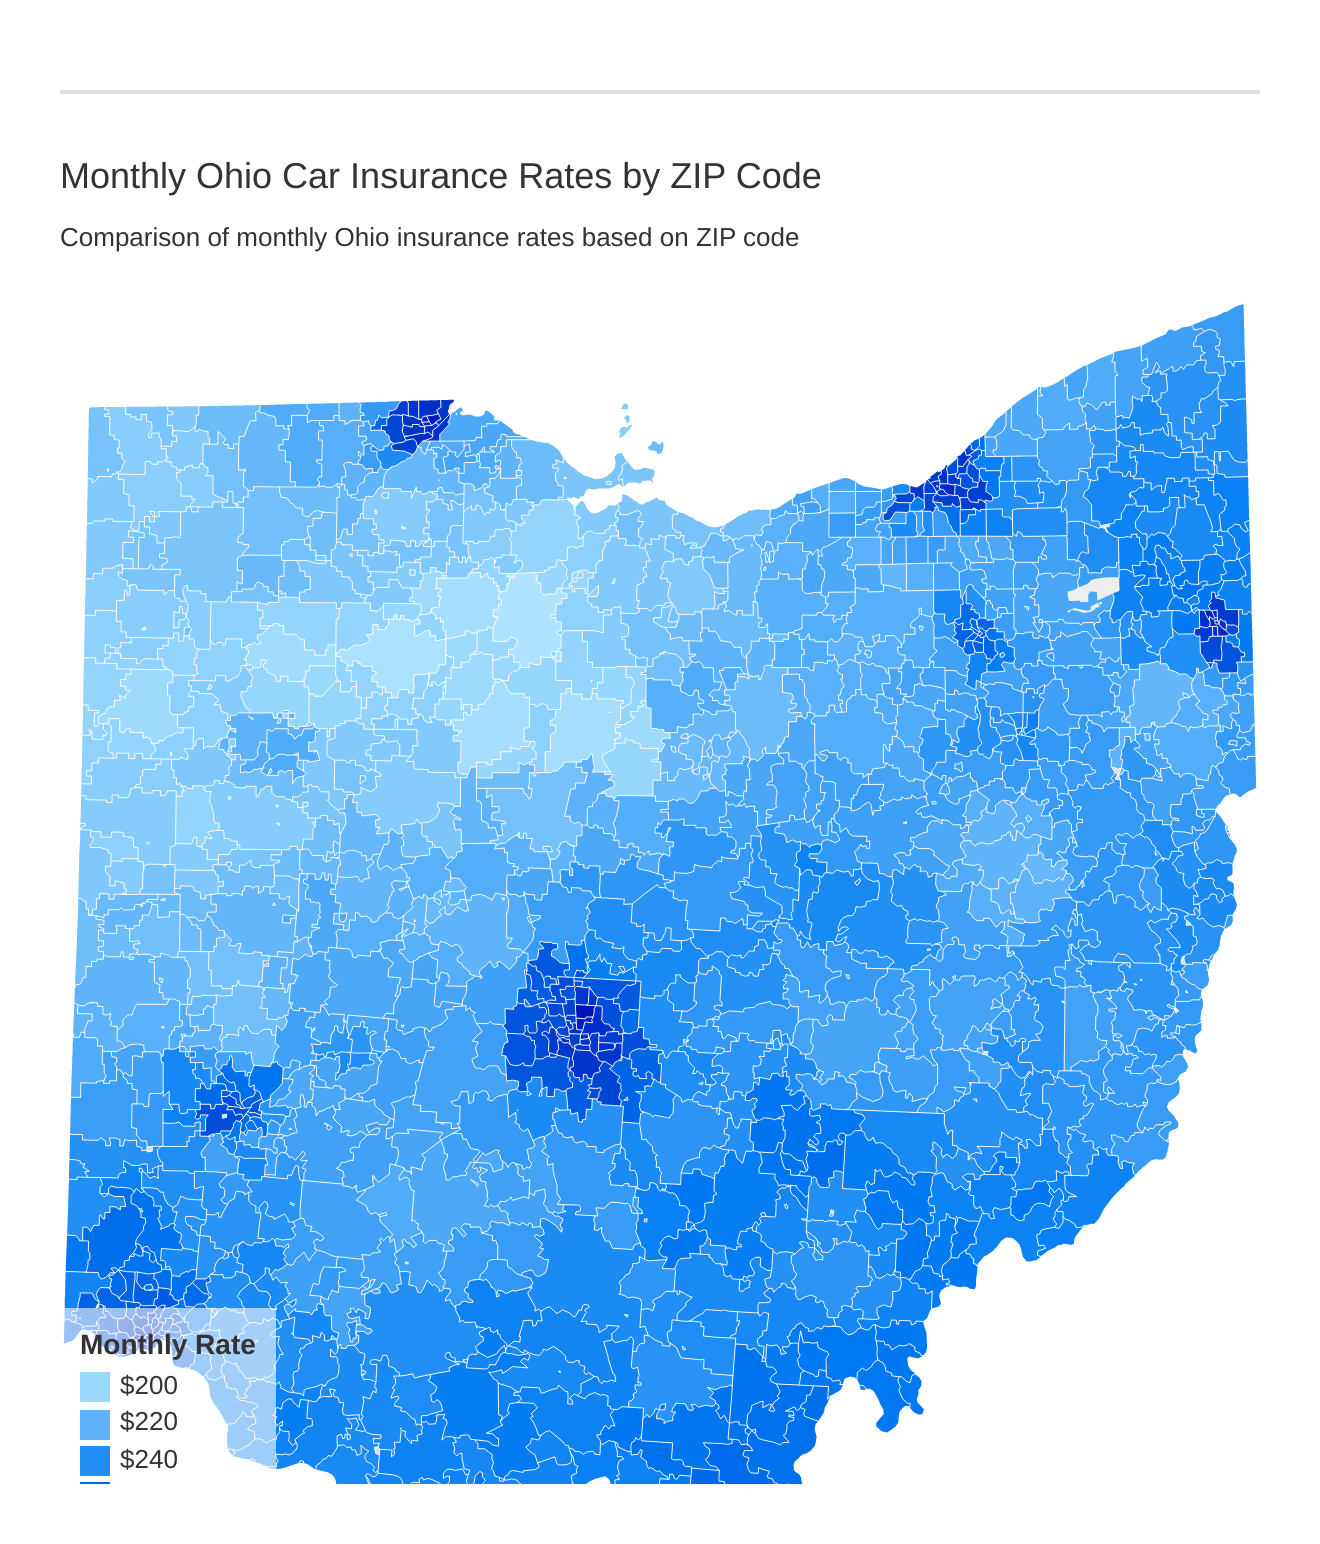 Monthly Ohio Car Insurance Rates by ZIP Code